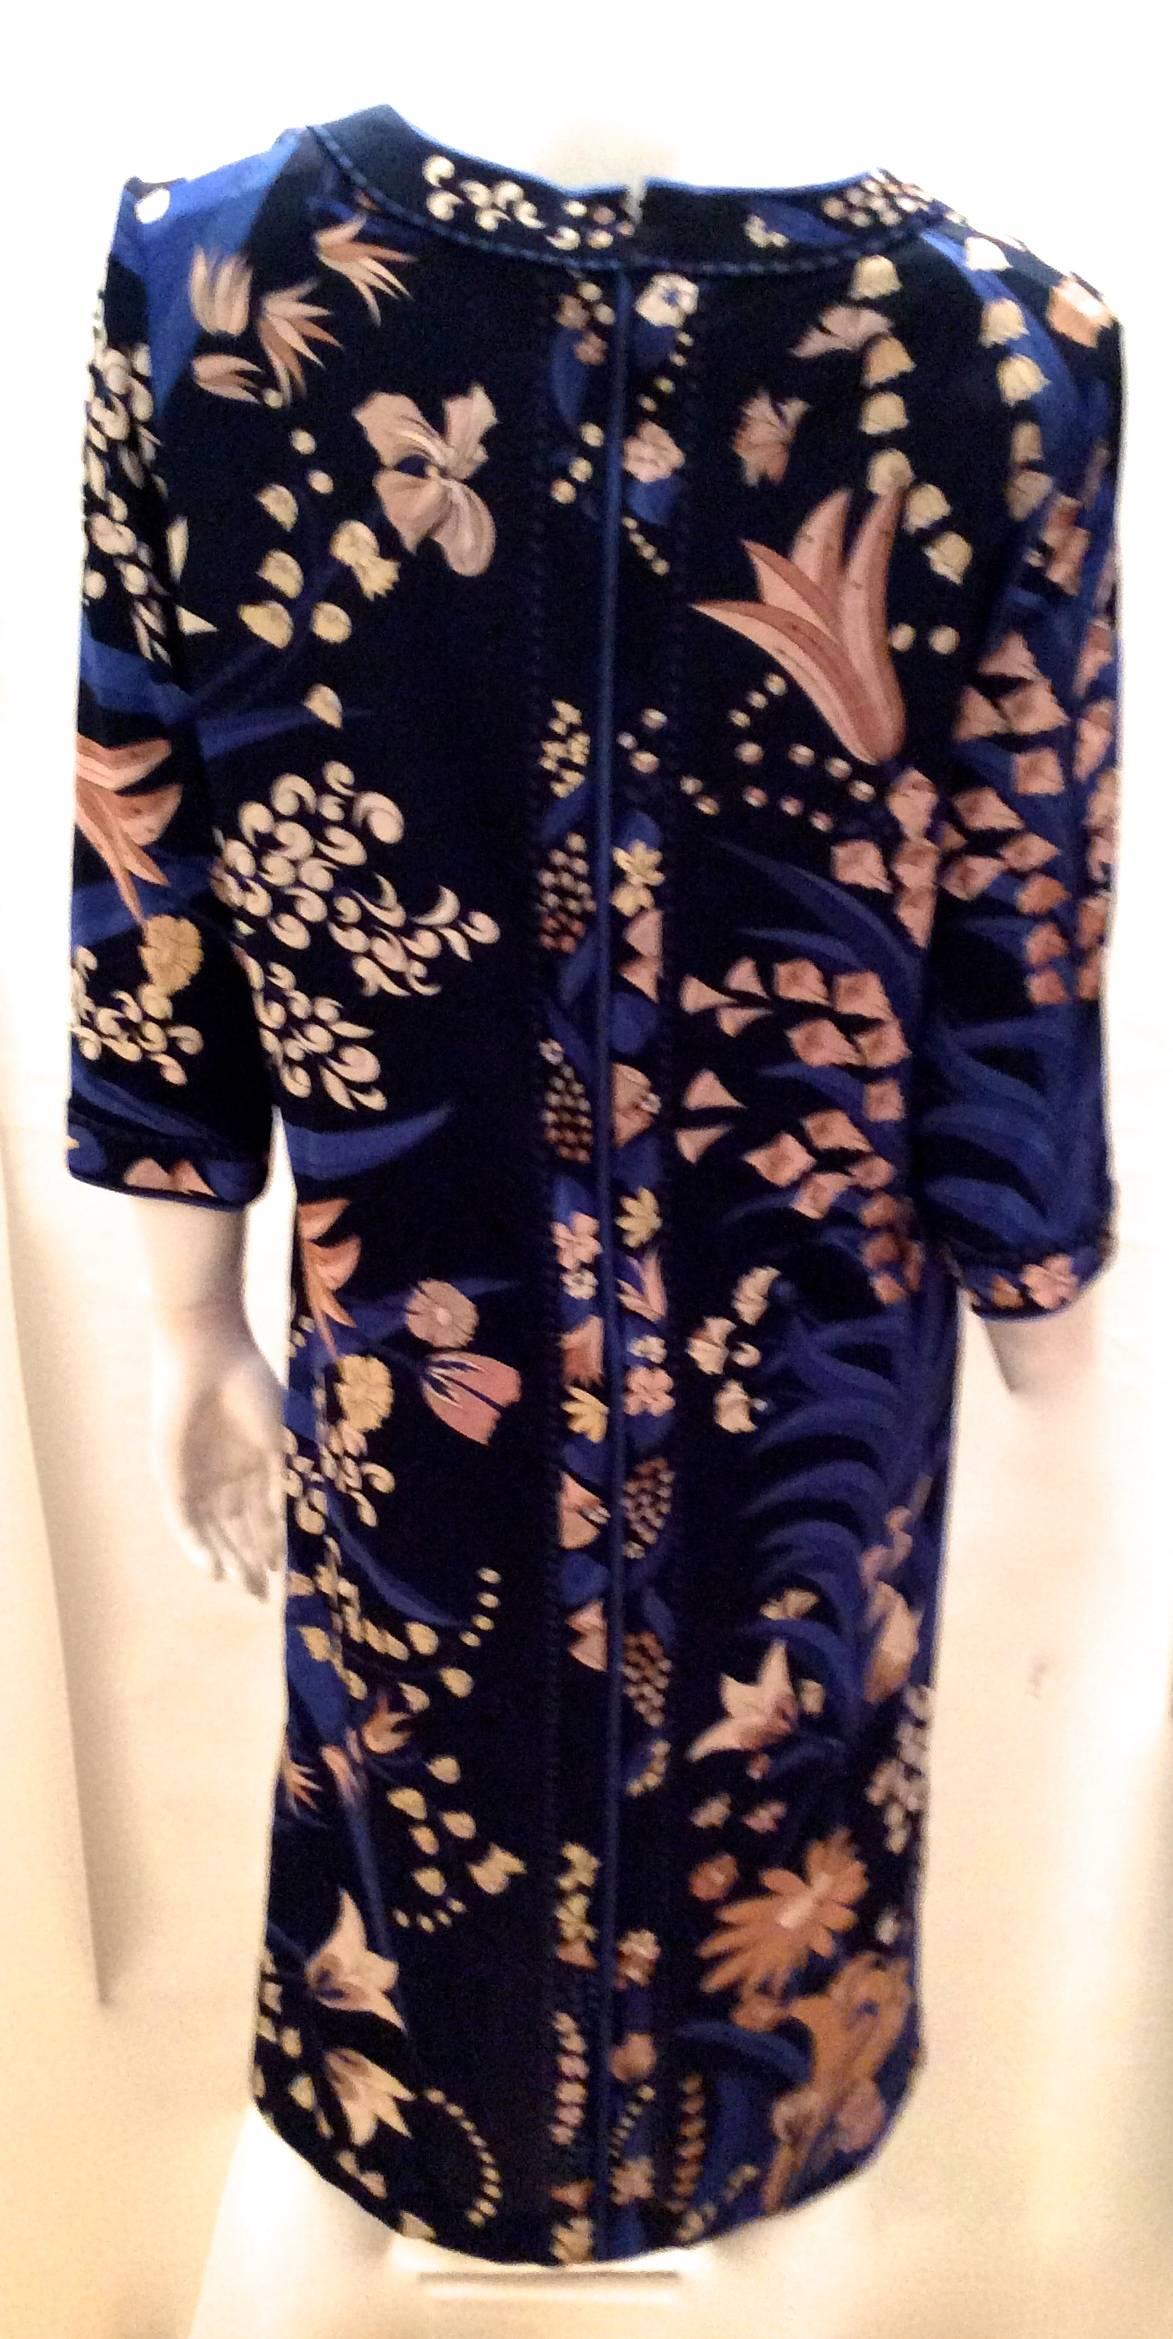 You are looking at a perfect Bessi made in Italy size 12 dress. The pattern throughout the dress is various flowers and leaves with the Bessi signature throughout the pattern. The design is Bessi at its best with beige flowers with shades of blue